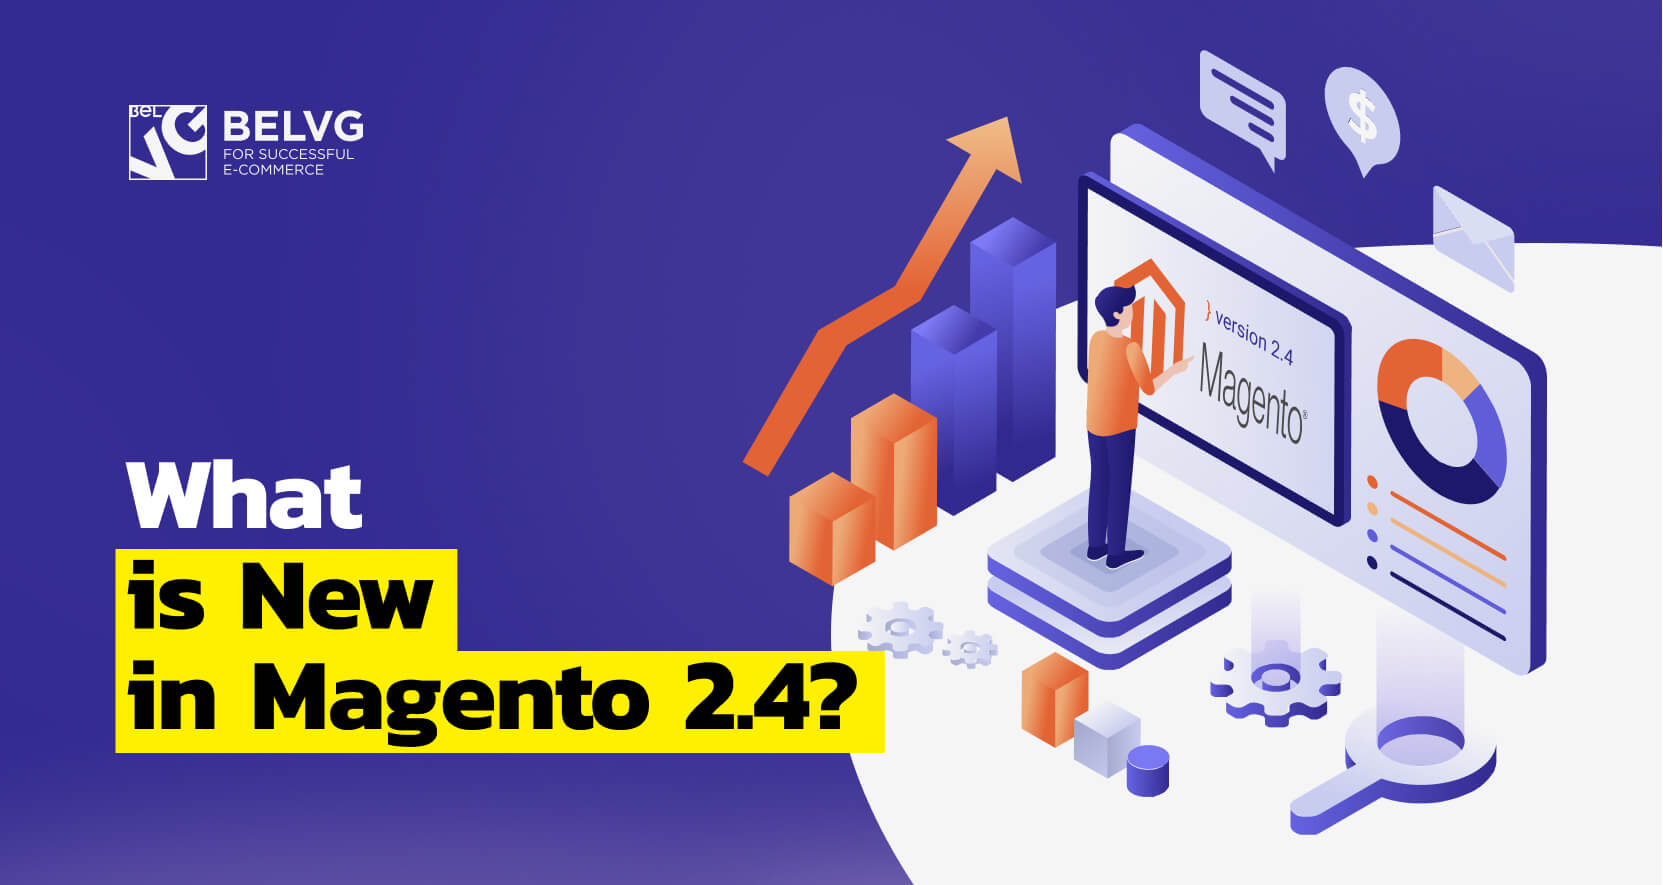 Magento 2.4 Release: What is New?